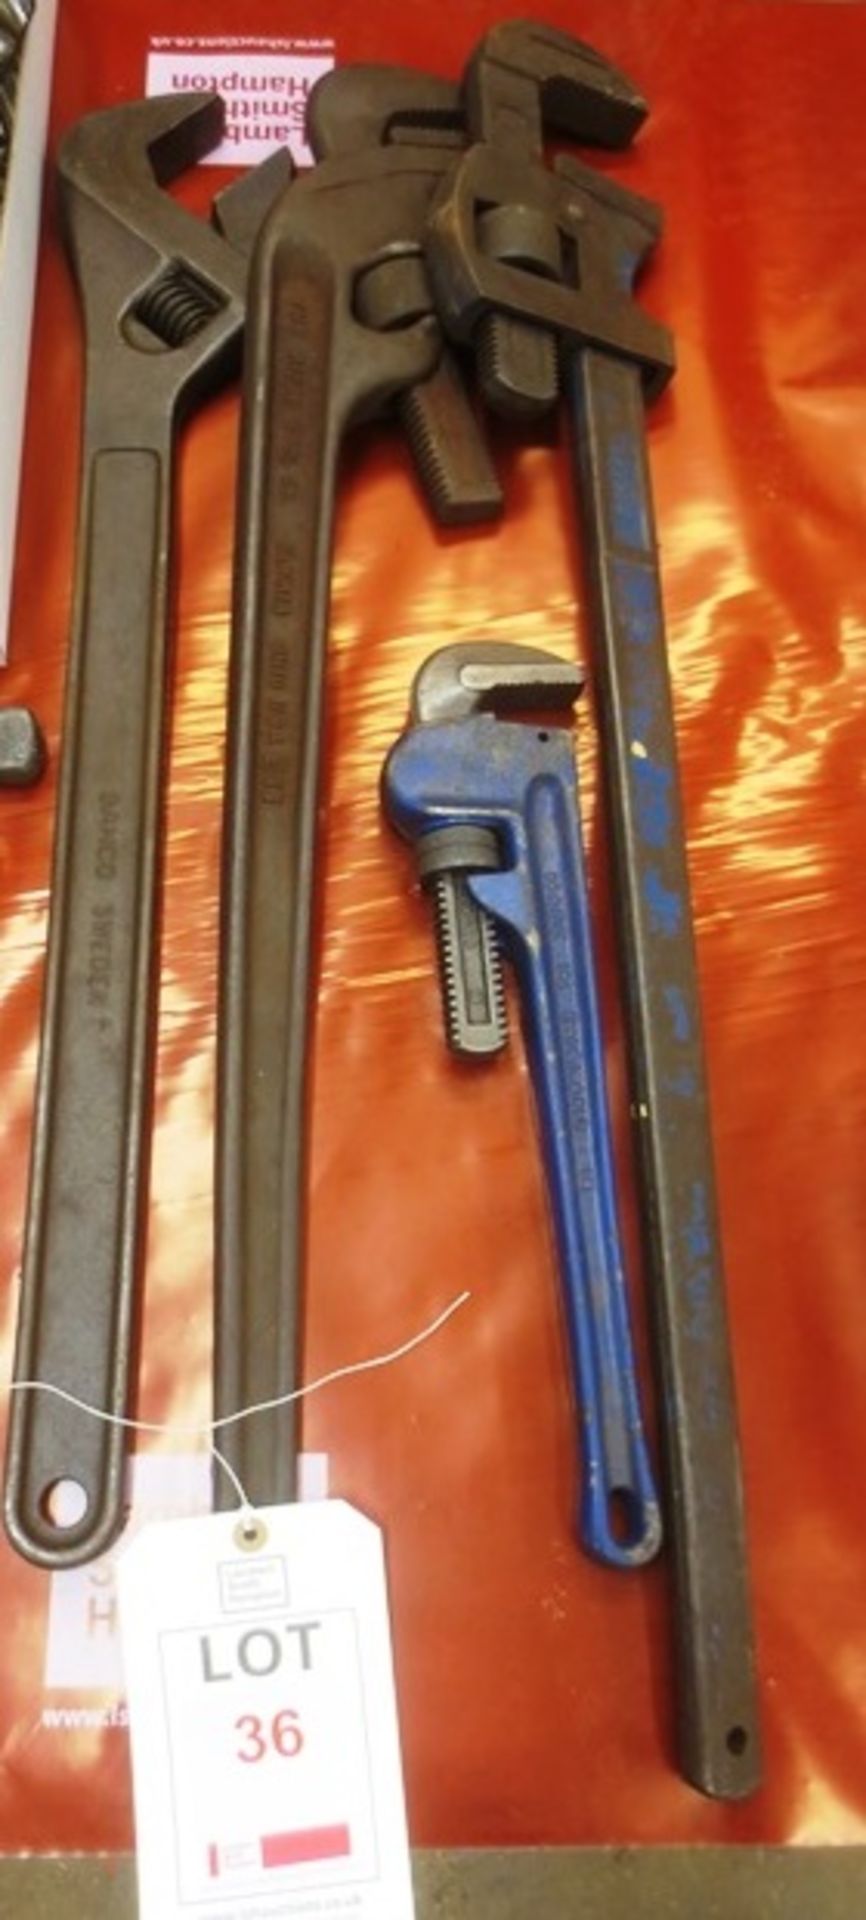 Four assorted adjustable wrenches